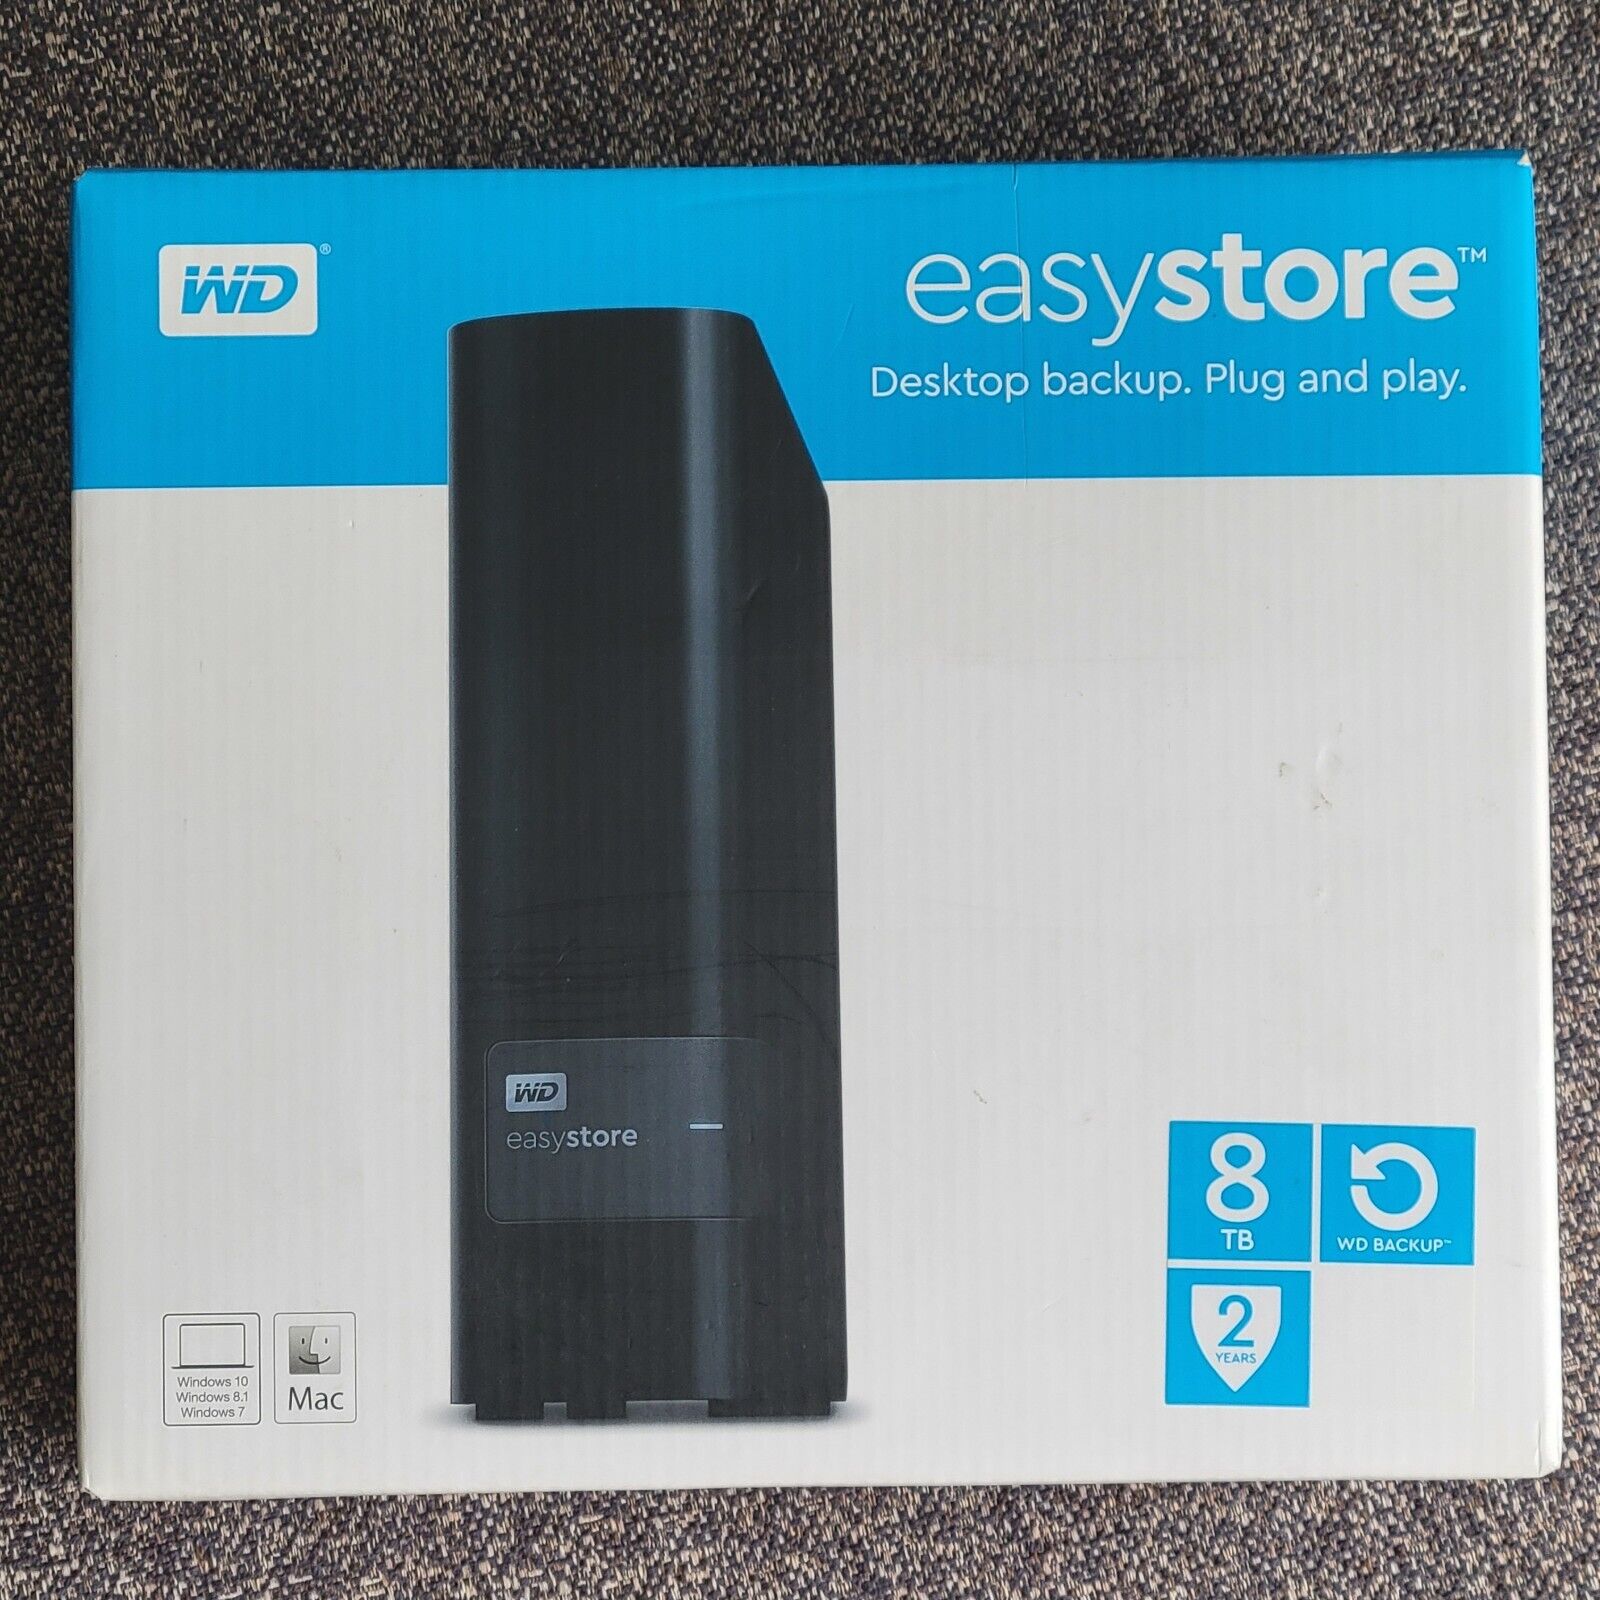 WD easystore 8TB External USB 3.0 Hard Drive WDBBCKA0080HBK-NESN *Missing cables